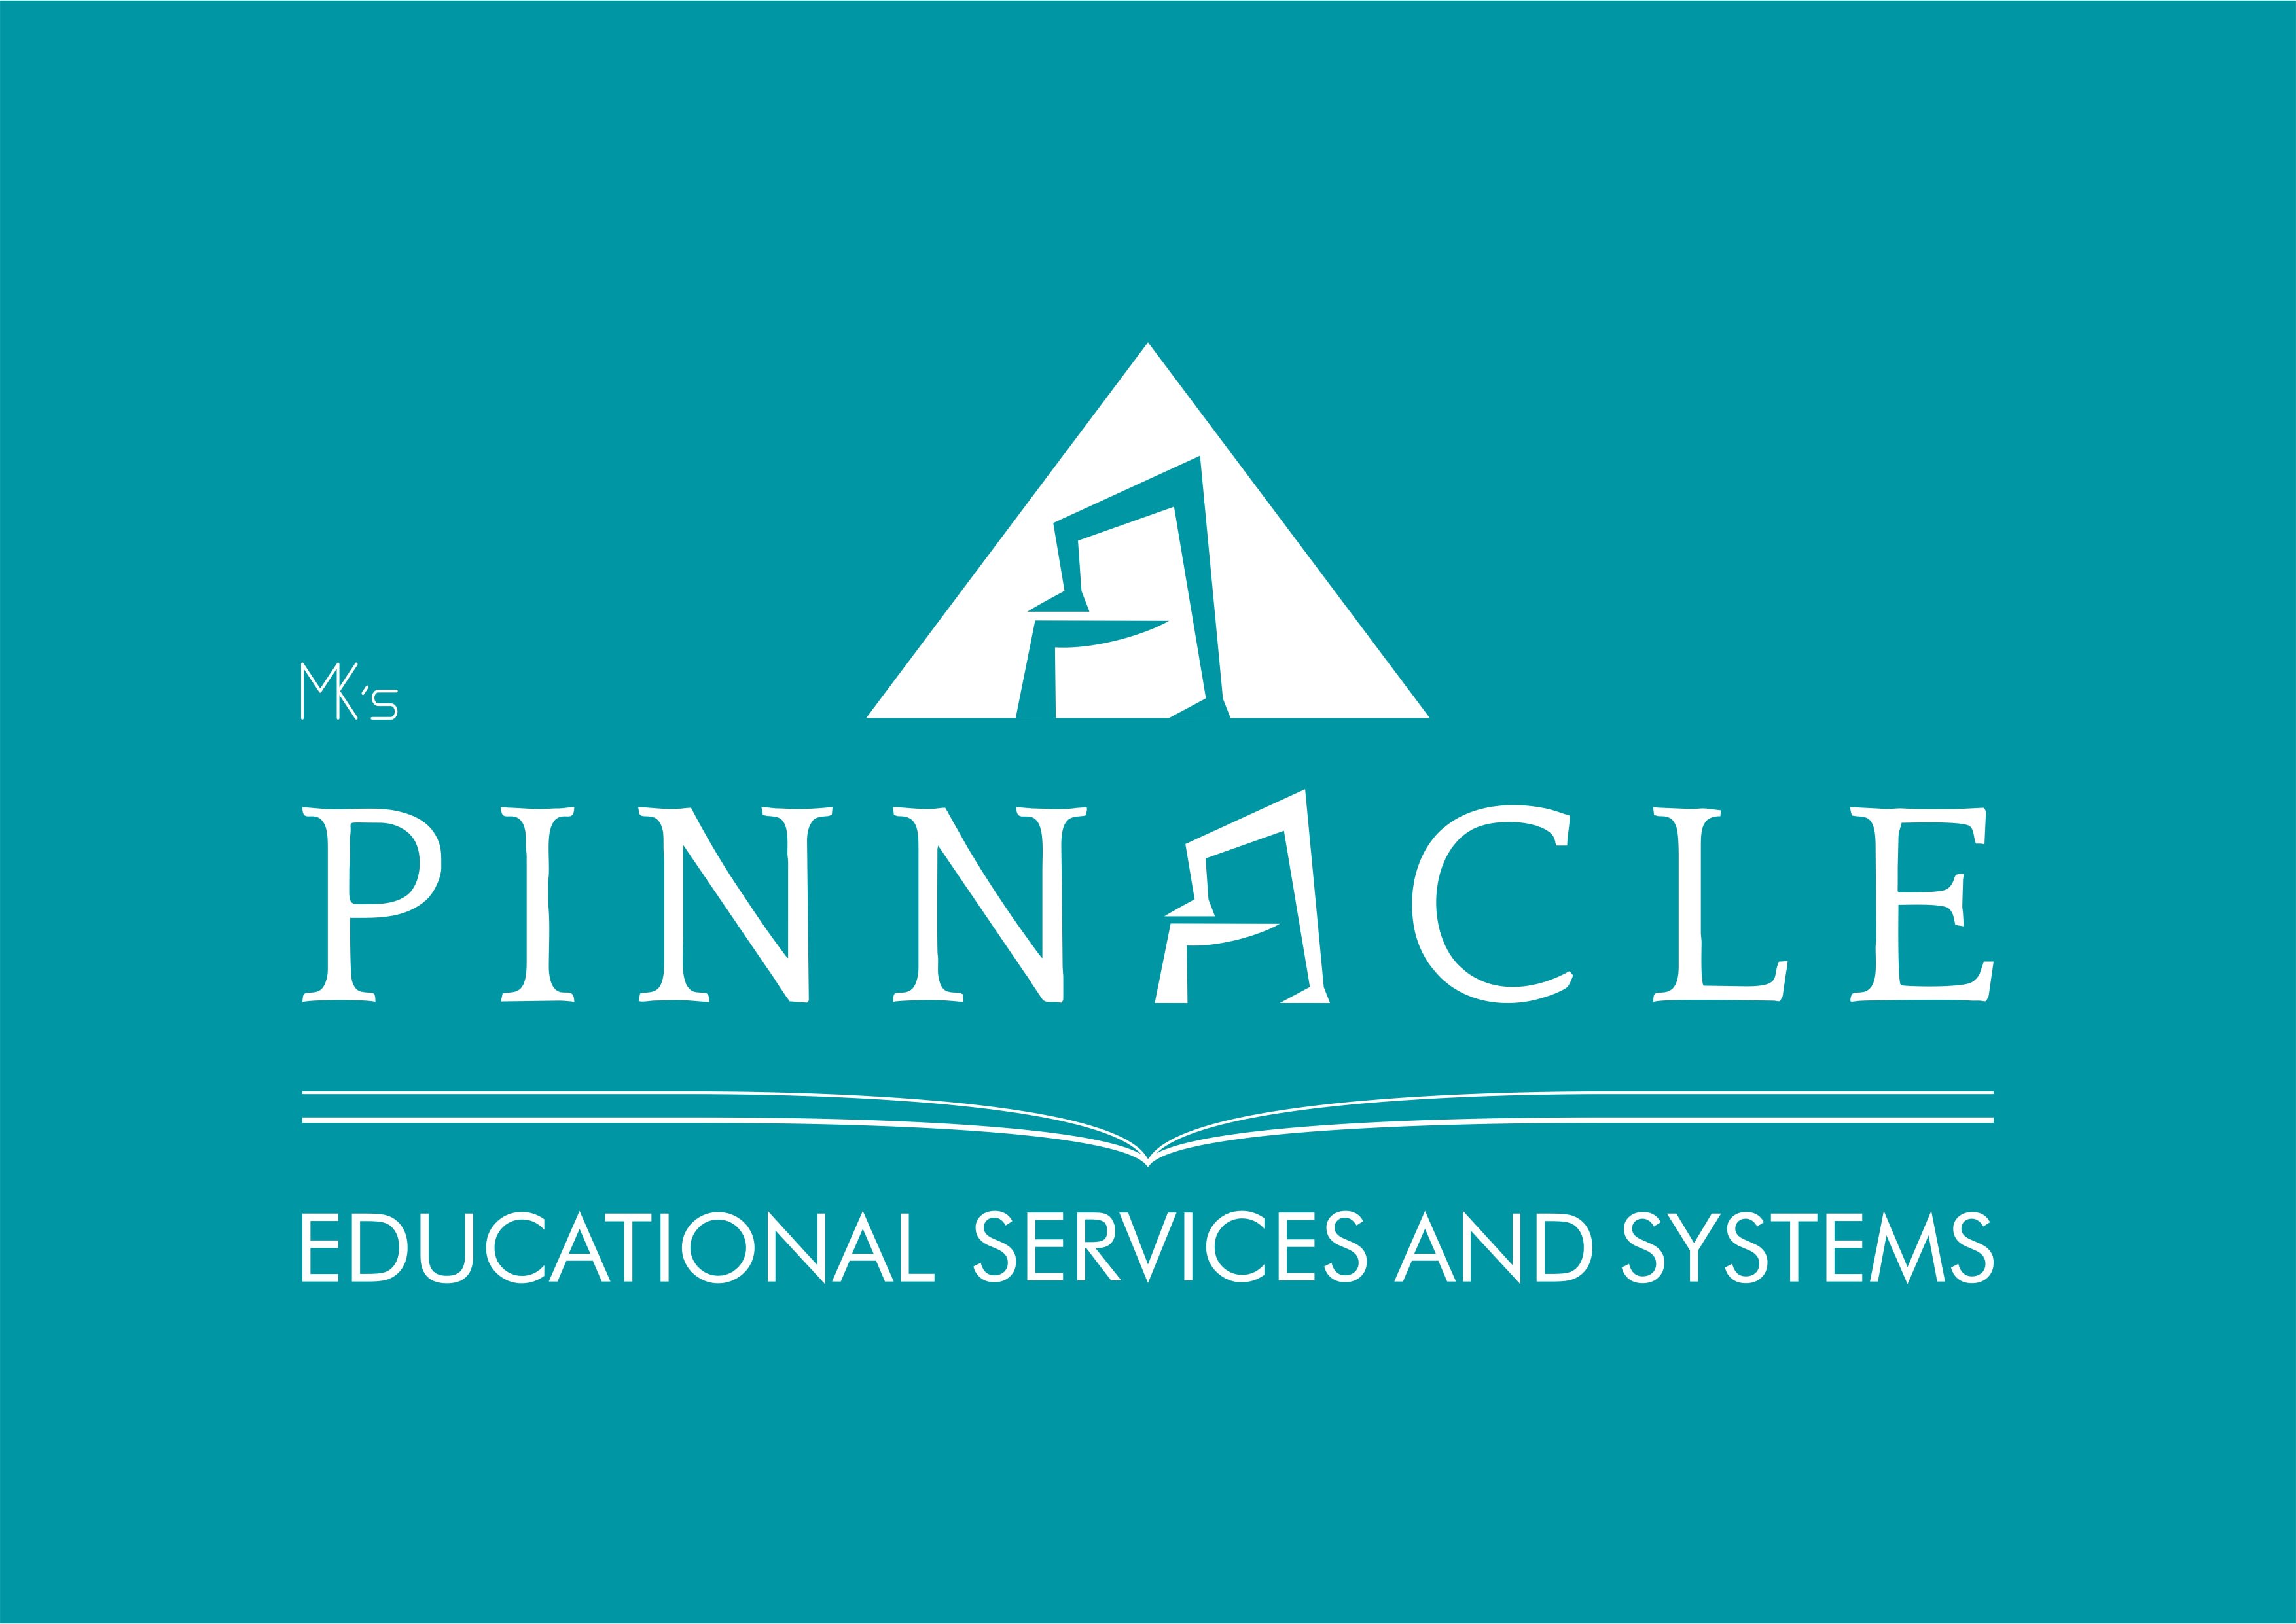 Pinnacle Educational Systems And Services